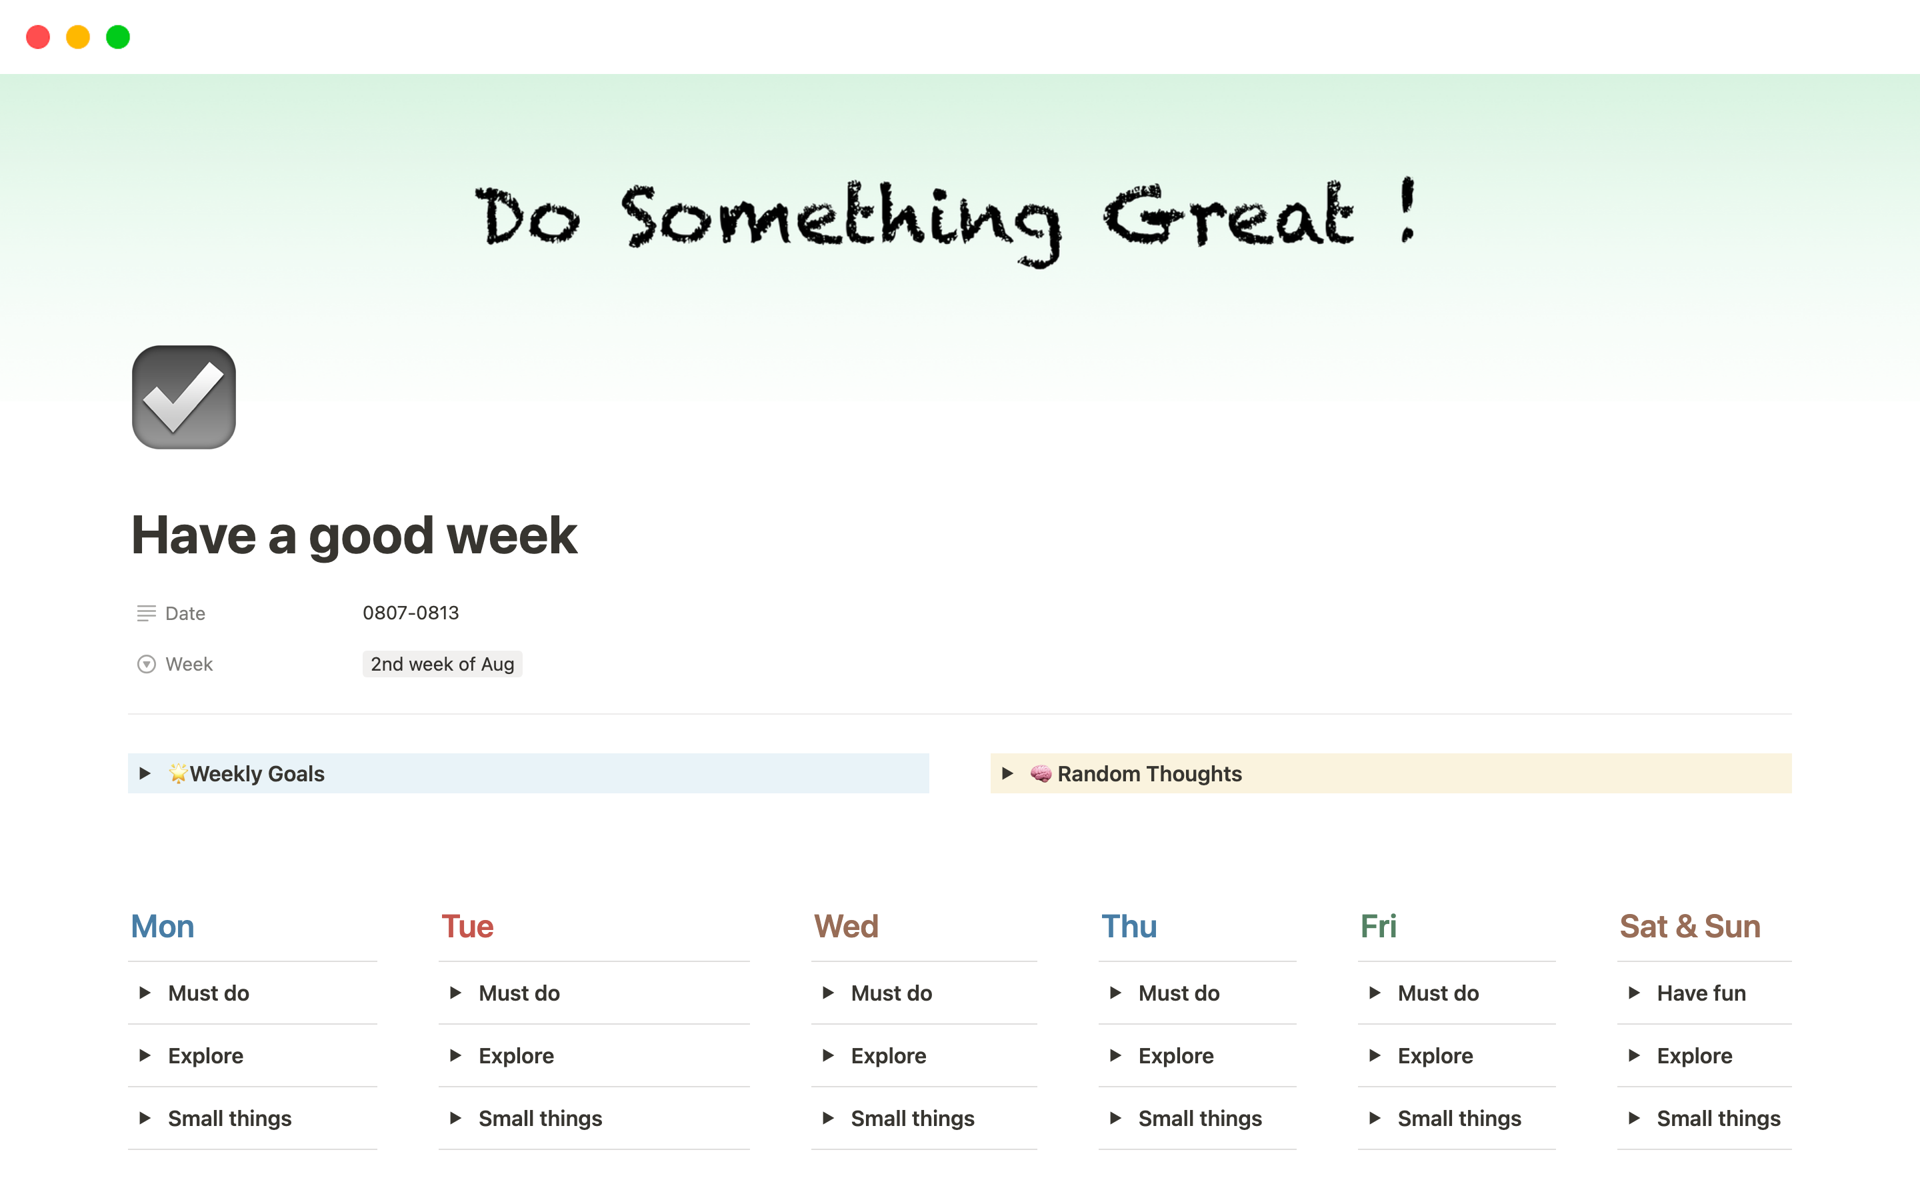 Optimize your week with our Weekly Planner template, categorizing tasks into 'Must Do,' 'Explore,' and 'Little Things To Do' for effective task management.